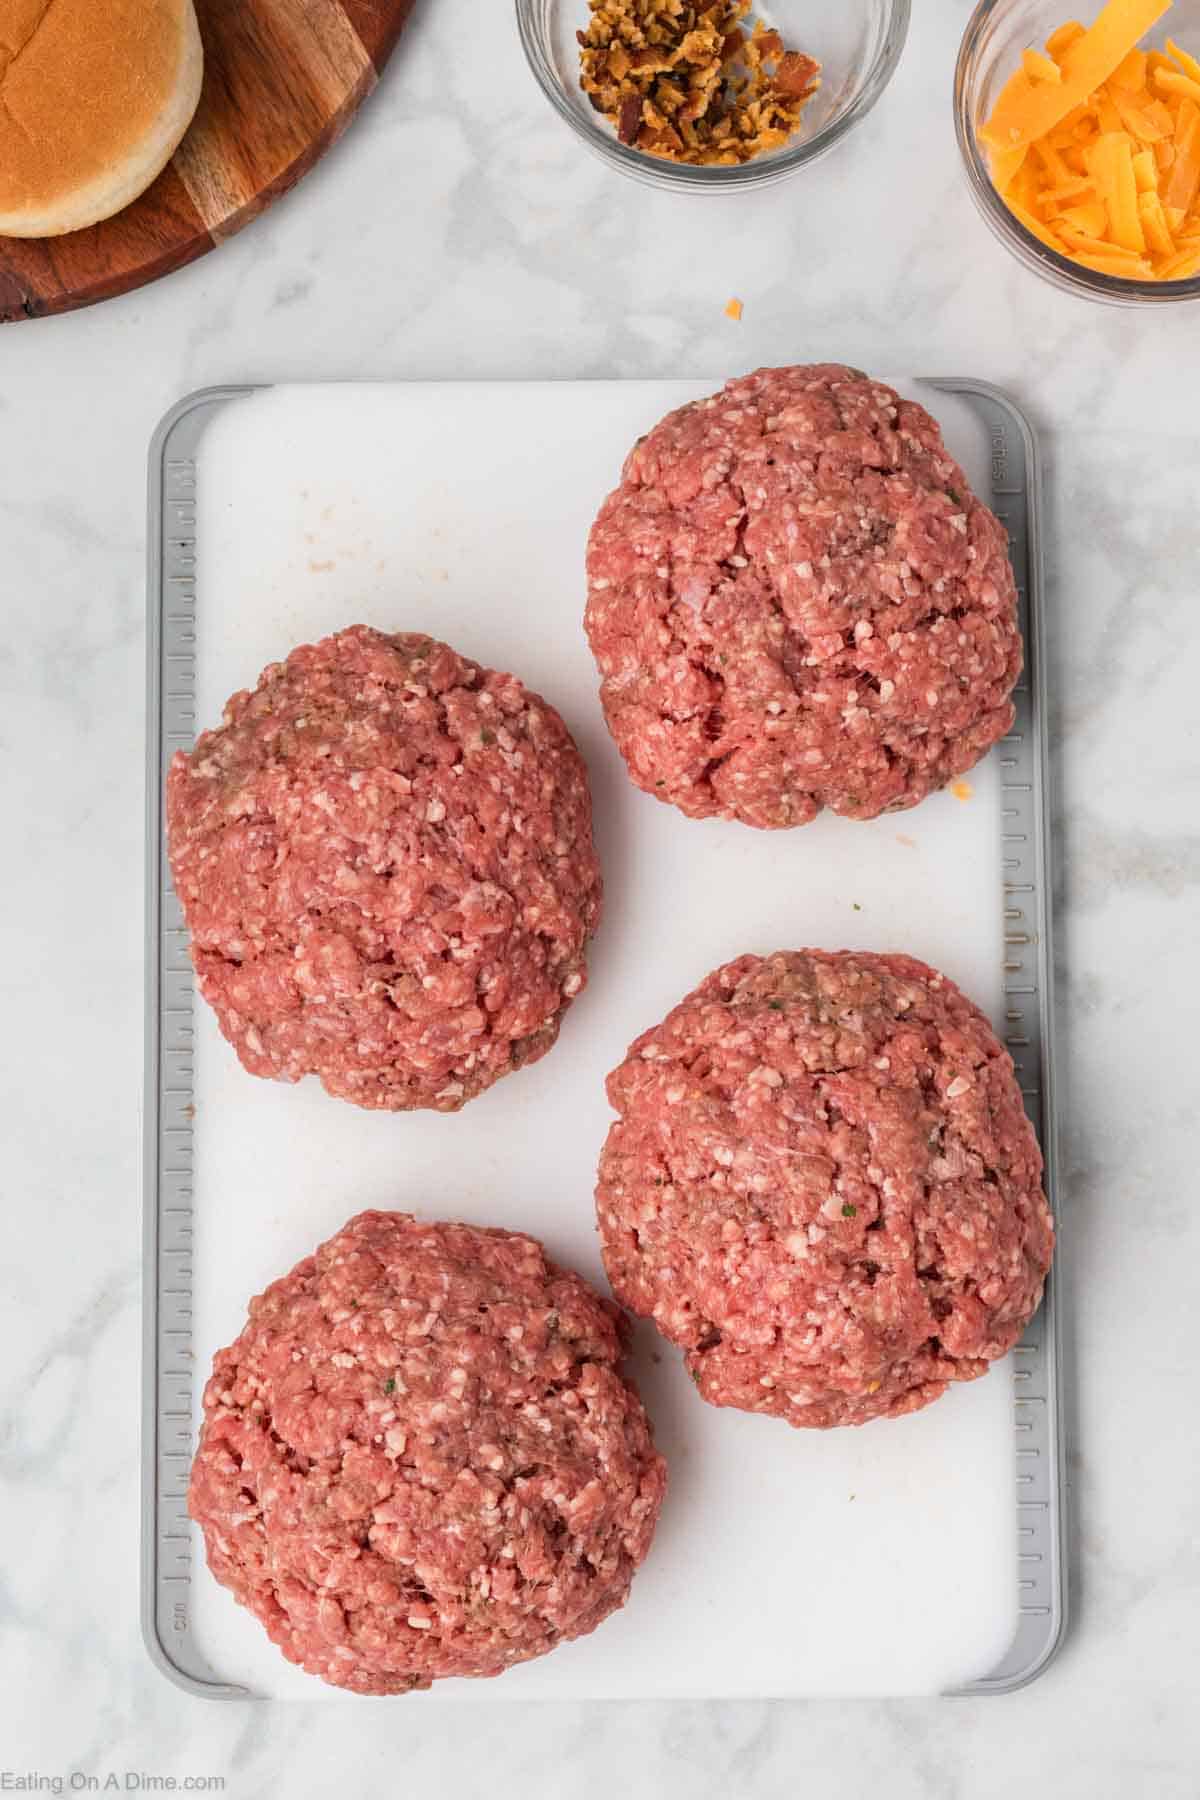 4 large ground beef patties on a cutting board